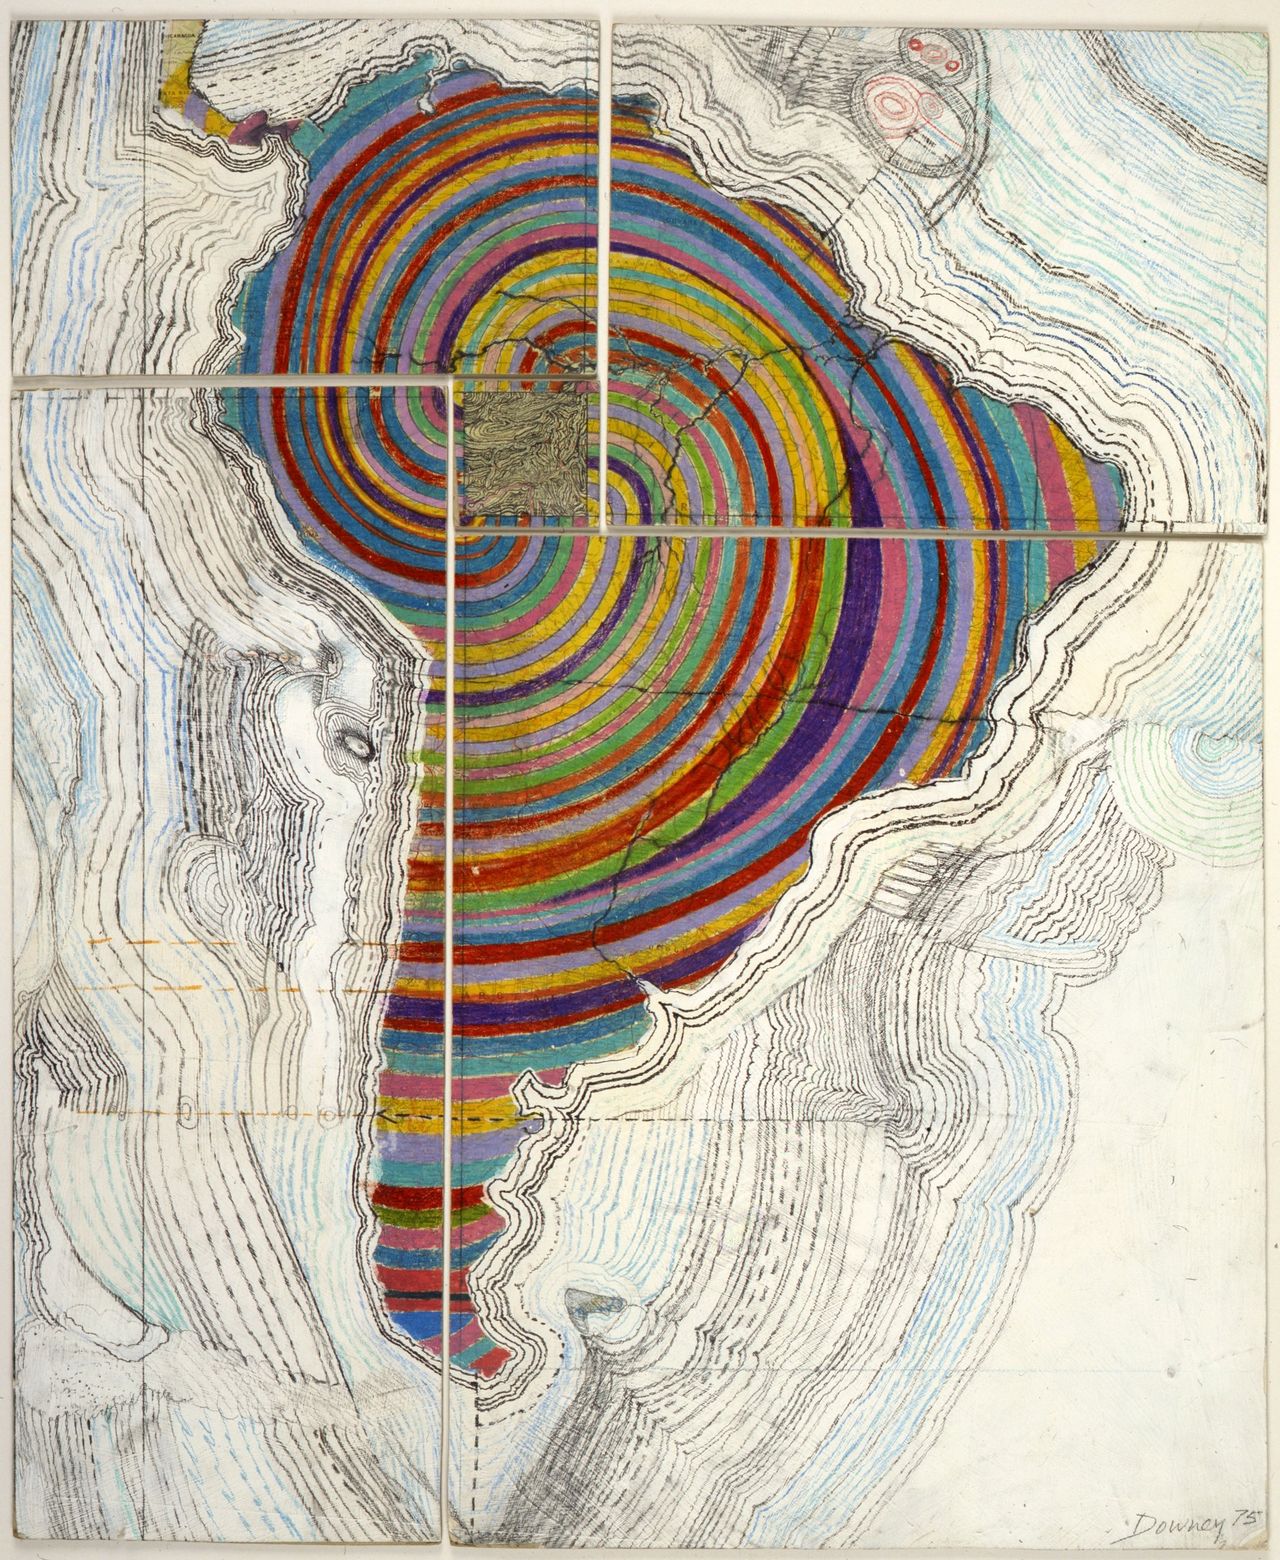 Juan Downey, "Map of America," 1975. Colored pencil, pencil, and synthetic polymer paint on map on board.